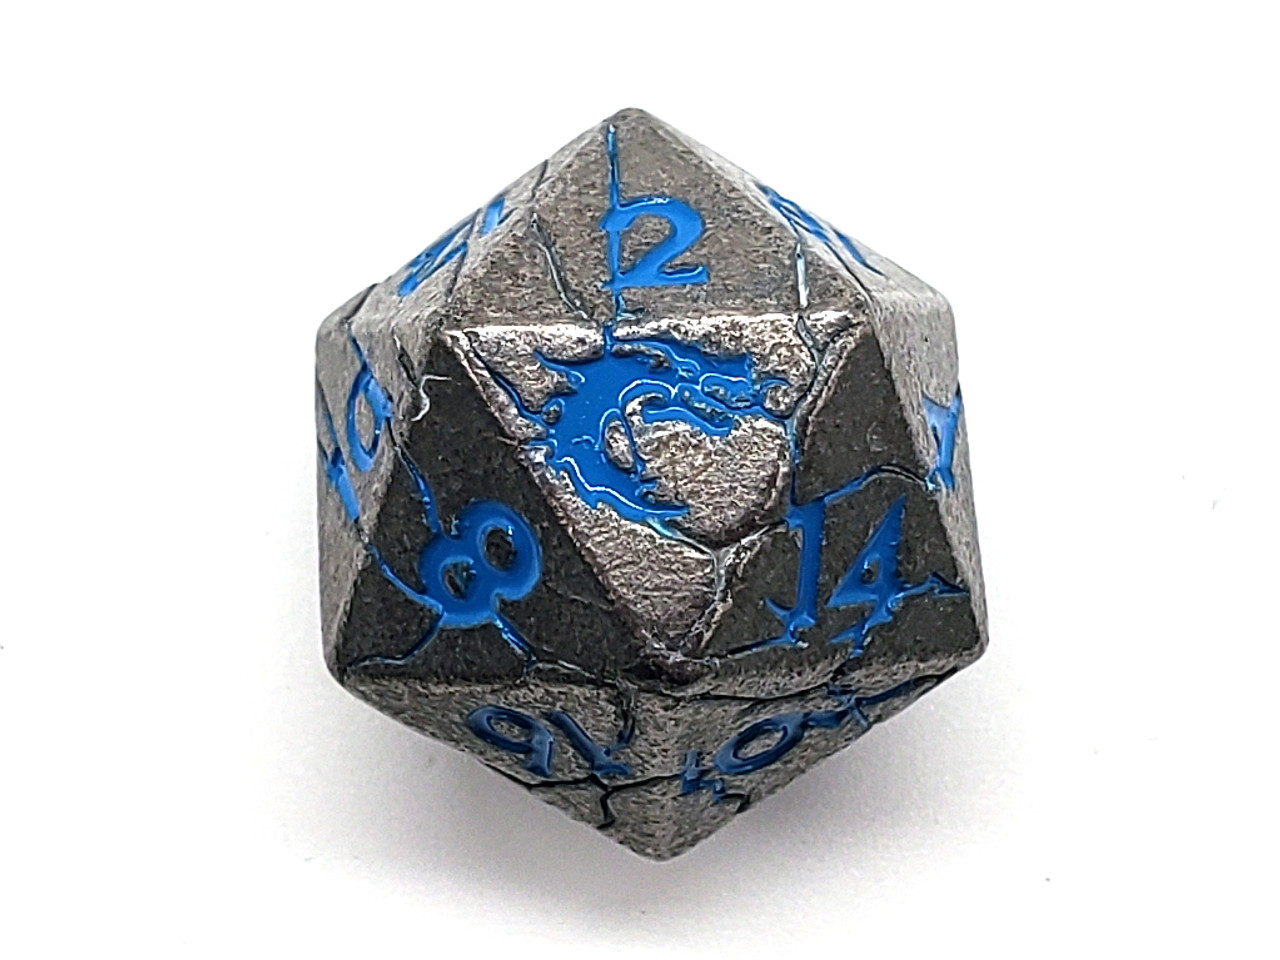 Opaque Dice - Black and Gold 34mm d20